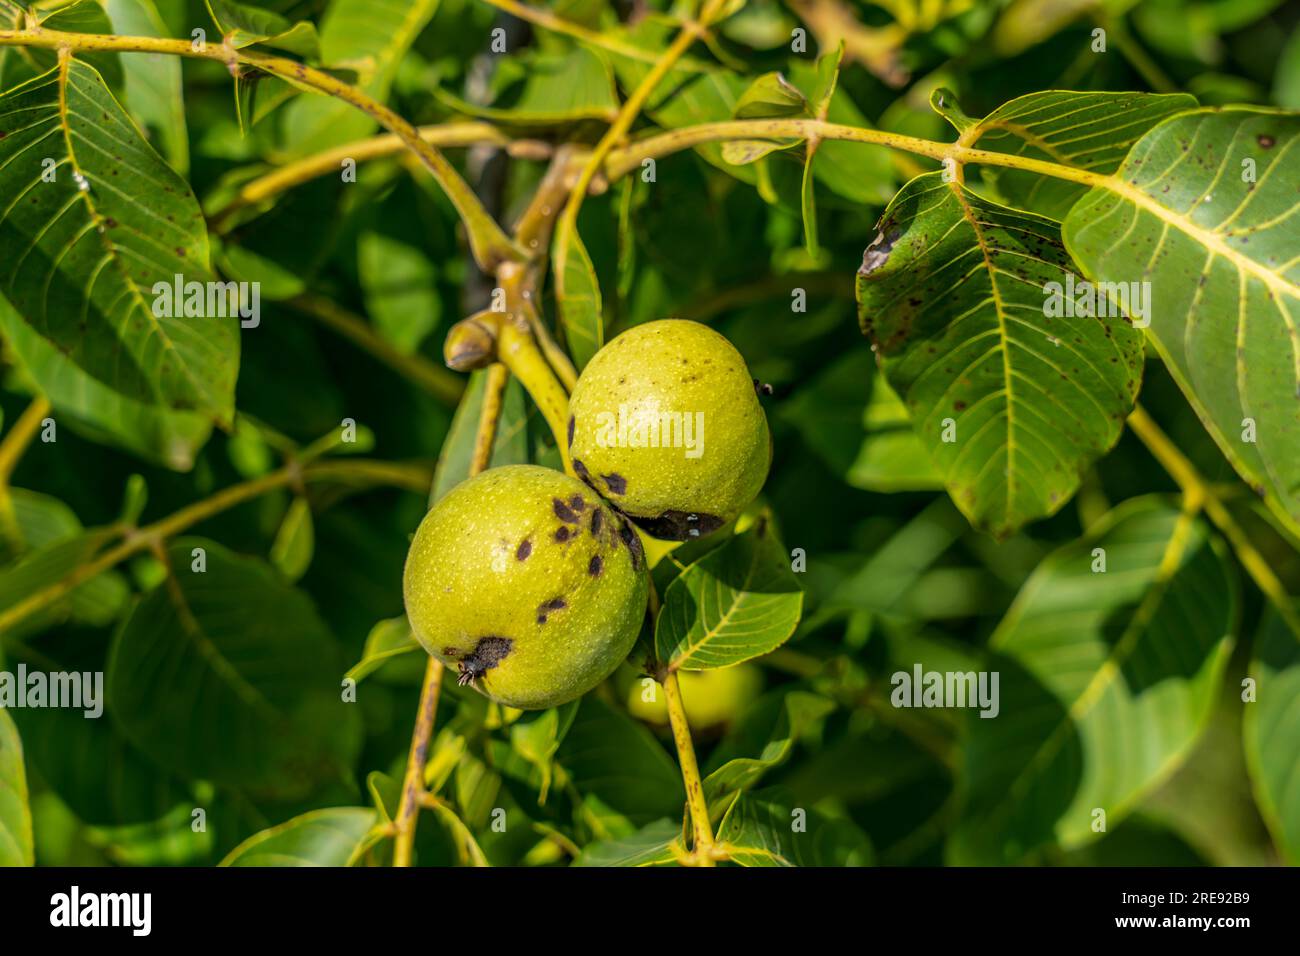 a few bunches of unripe walnuts in a green shell on the branches of a tree with green leaves Júglans régia Stock Photo